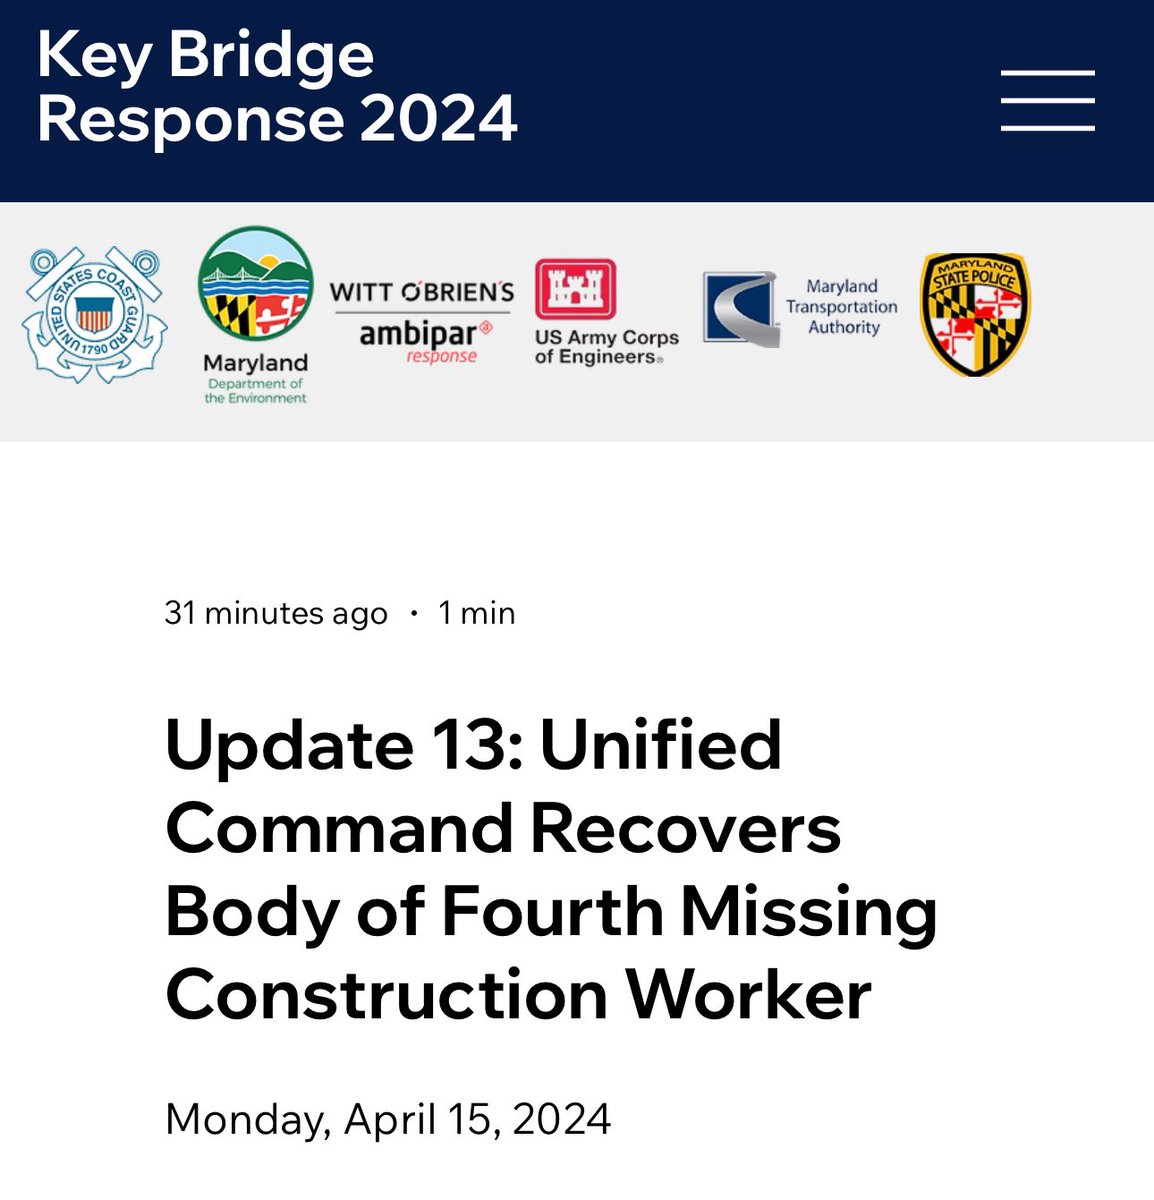 The #KeyBridgeNews Unified Command reports that salvage teams have recovered a fourth missing construction worker. More info: keybridgeresponse2024.com/post/unified-c…